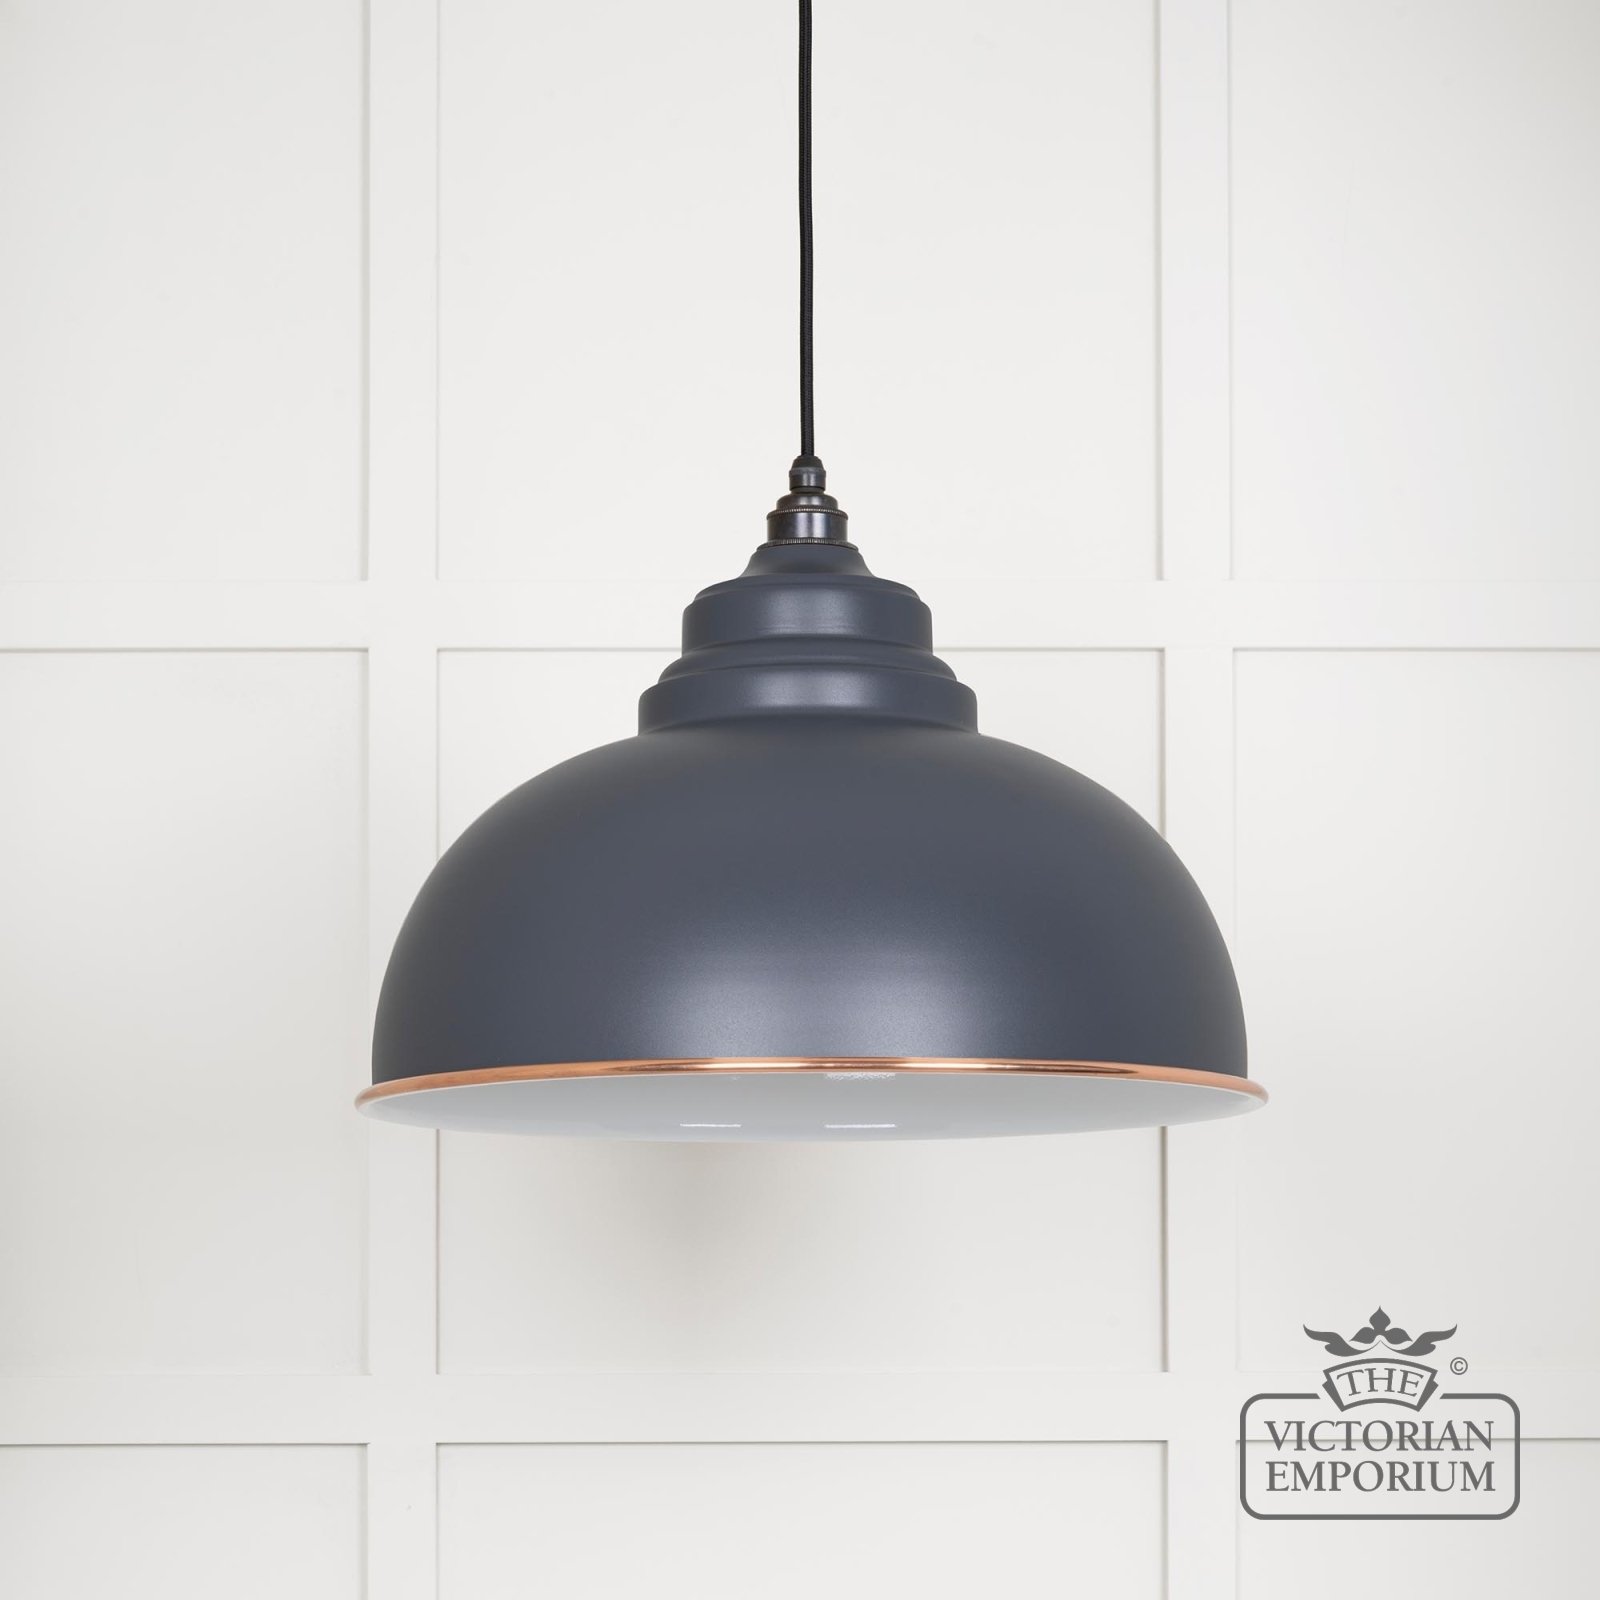 Harlow pendant in Slate with white gloss interior